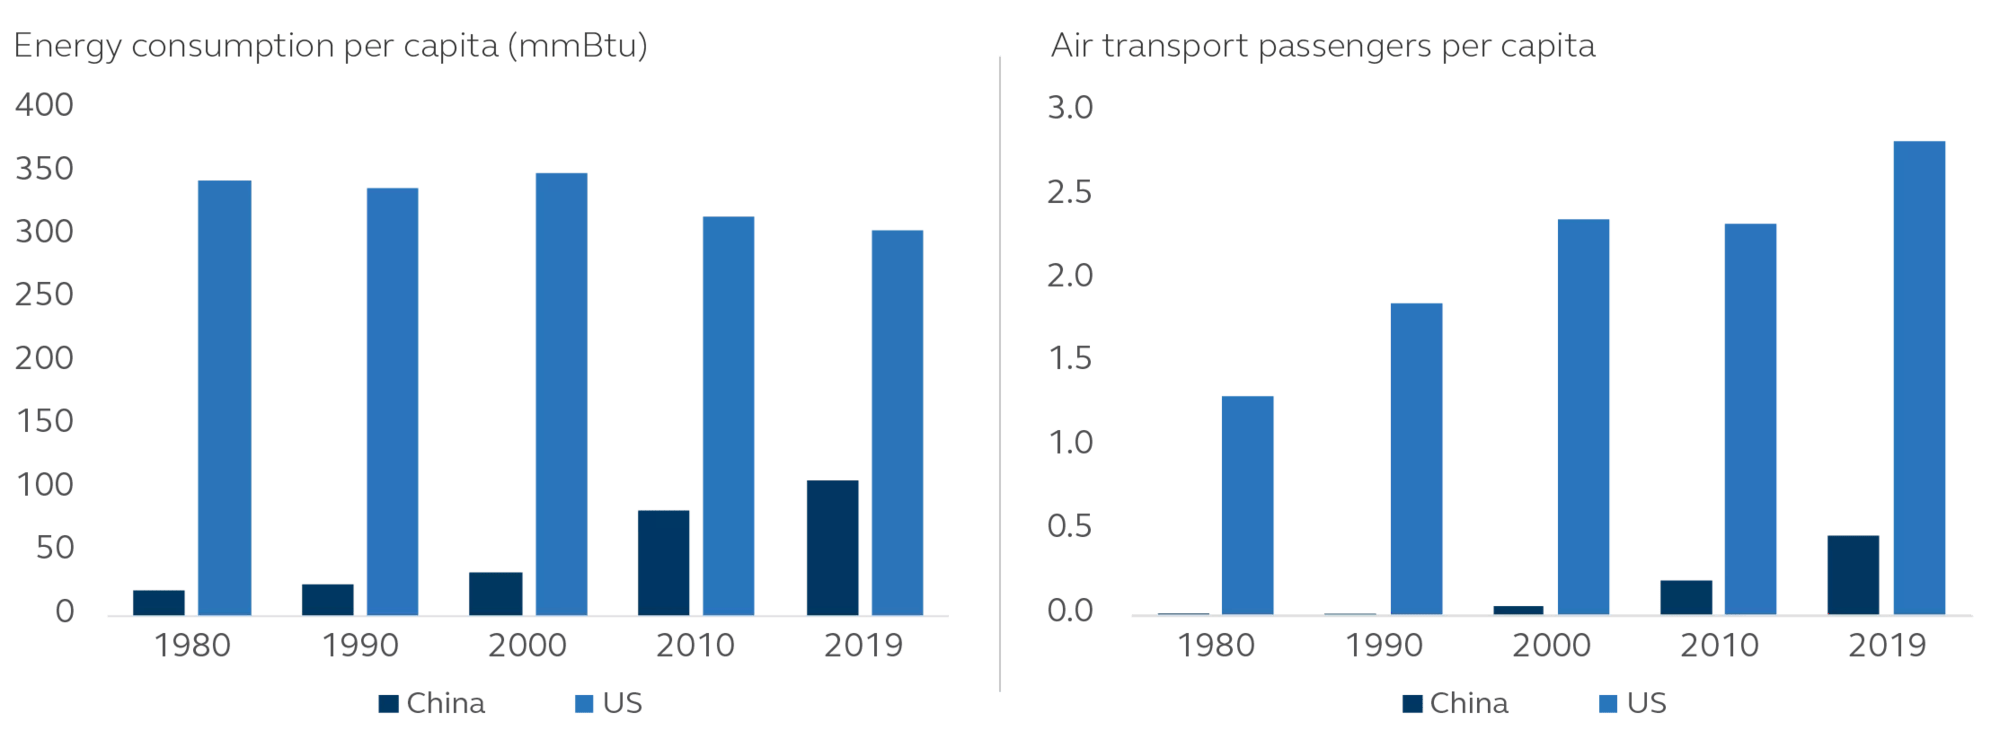 Bar chart comparisons of per capita air traffic and energy consumption in China and the U.S. from 1980-2019